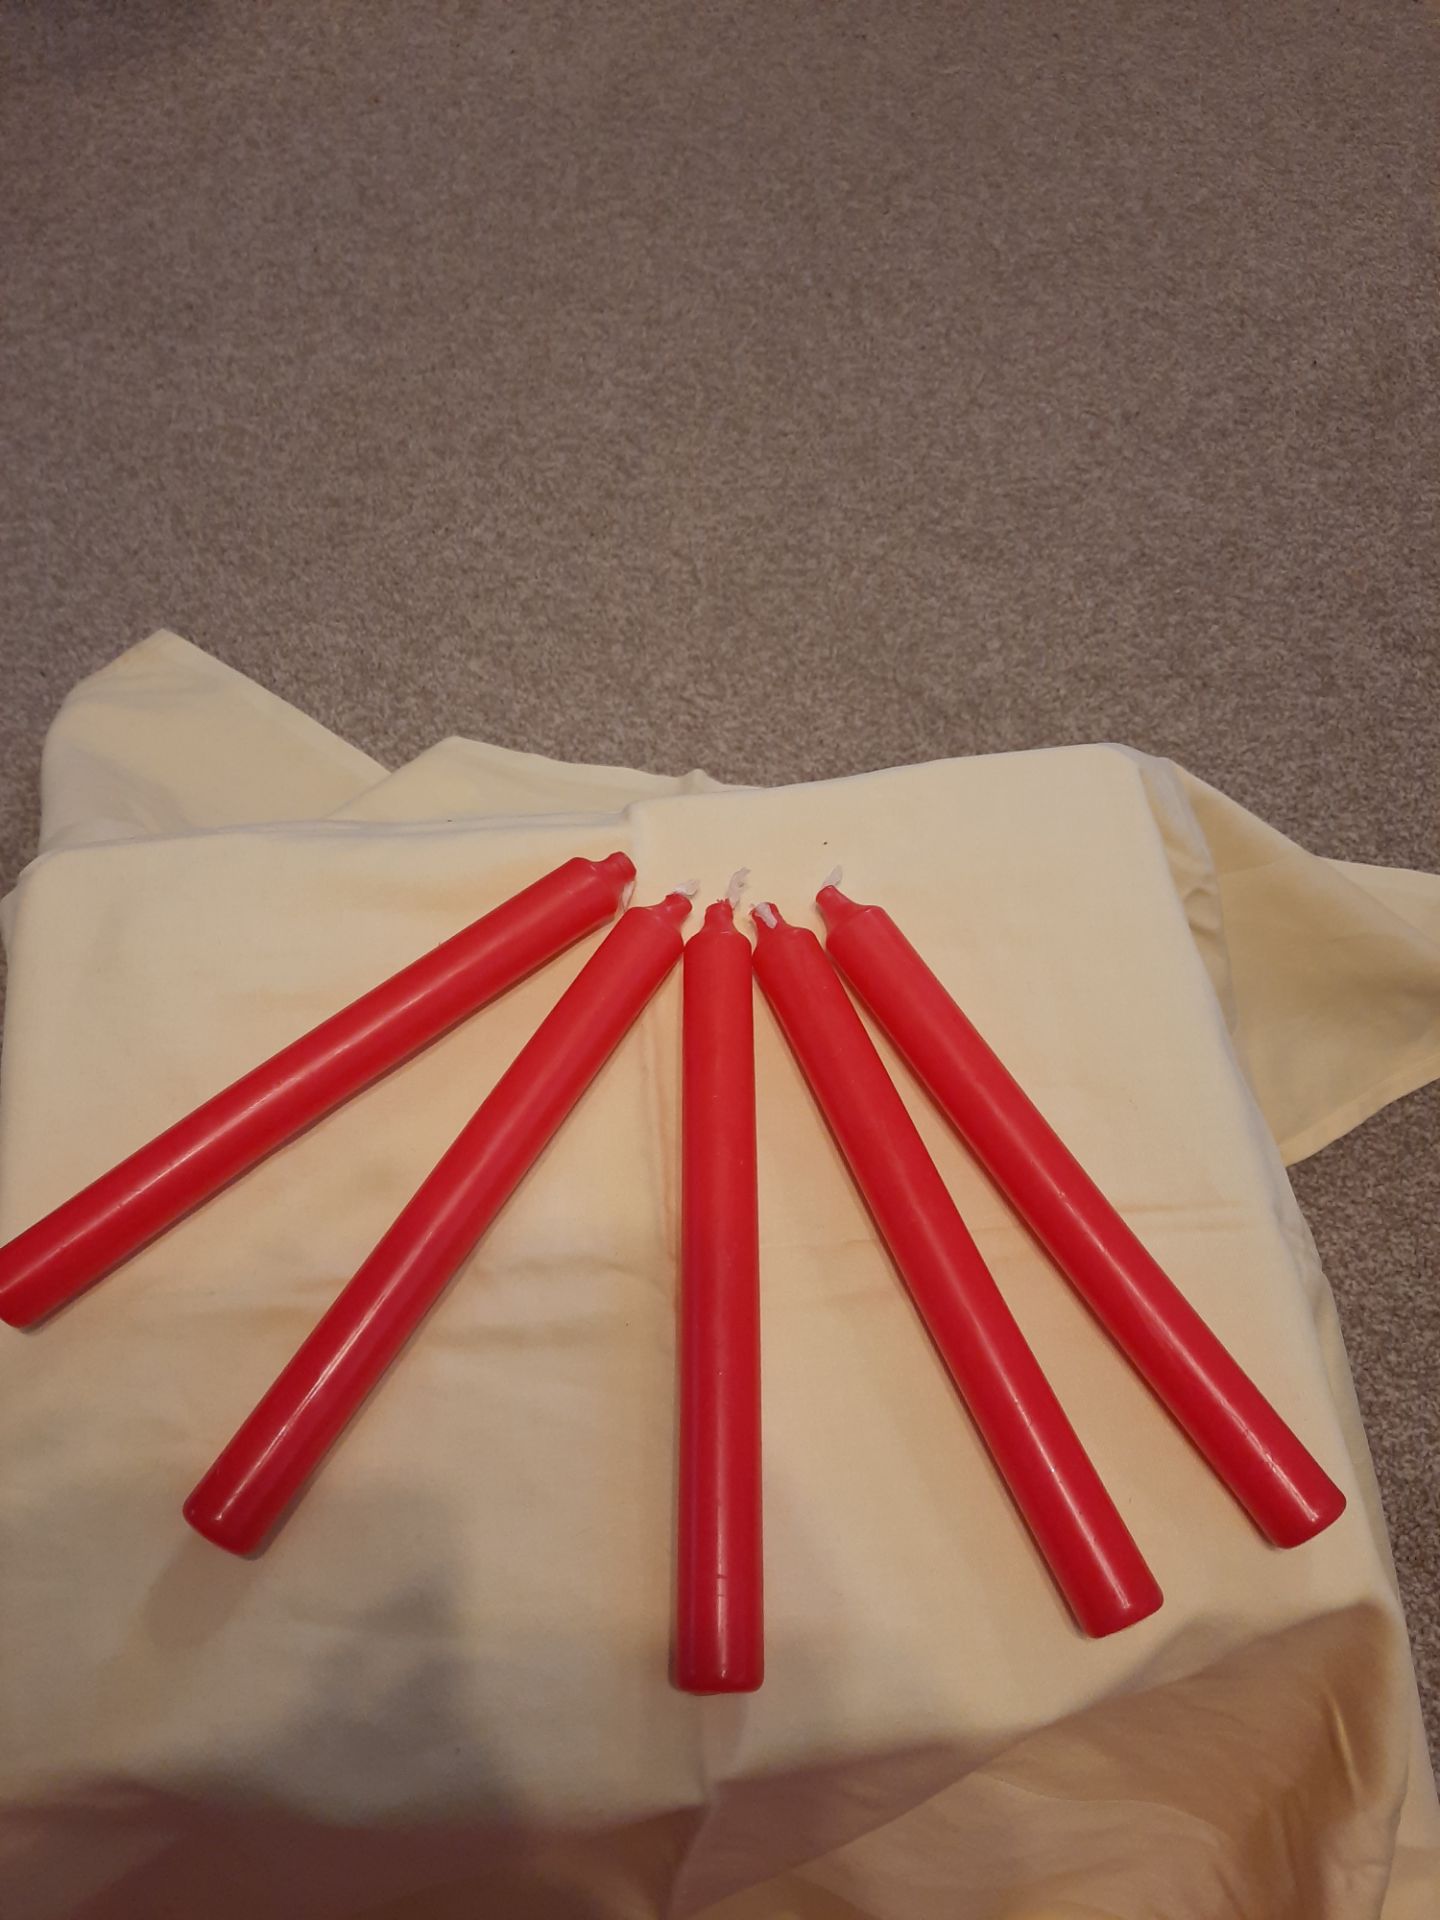 12 Red Dinner Candles - Image 4 of 4